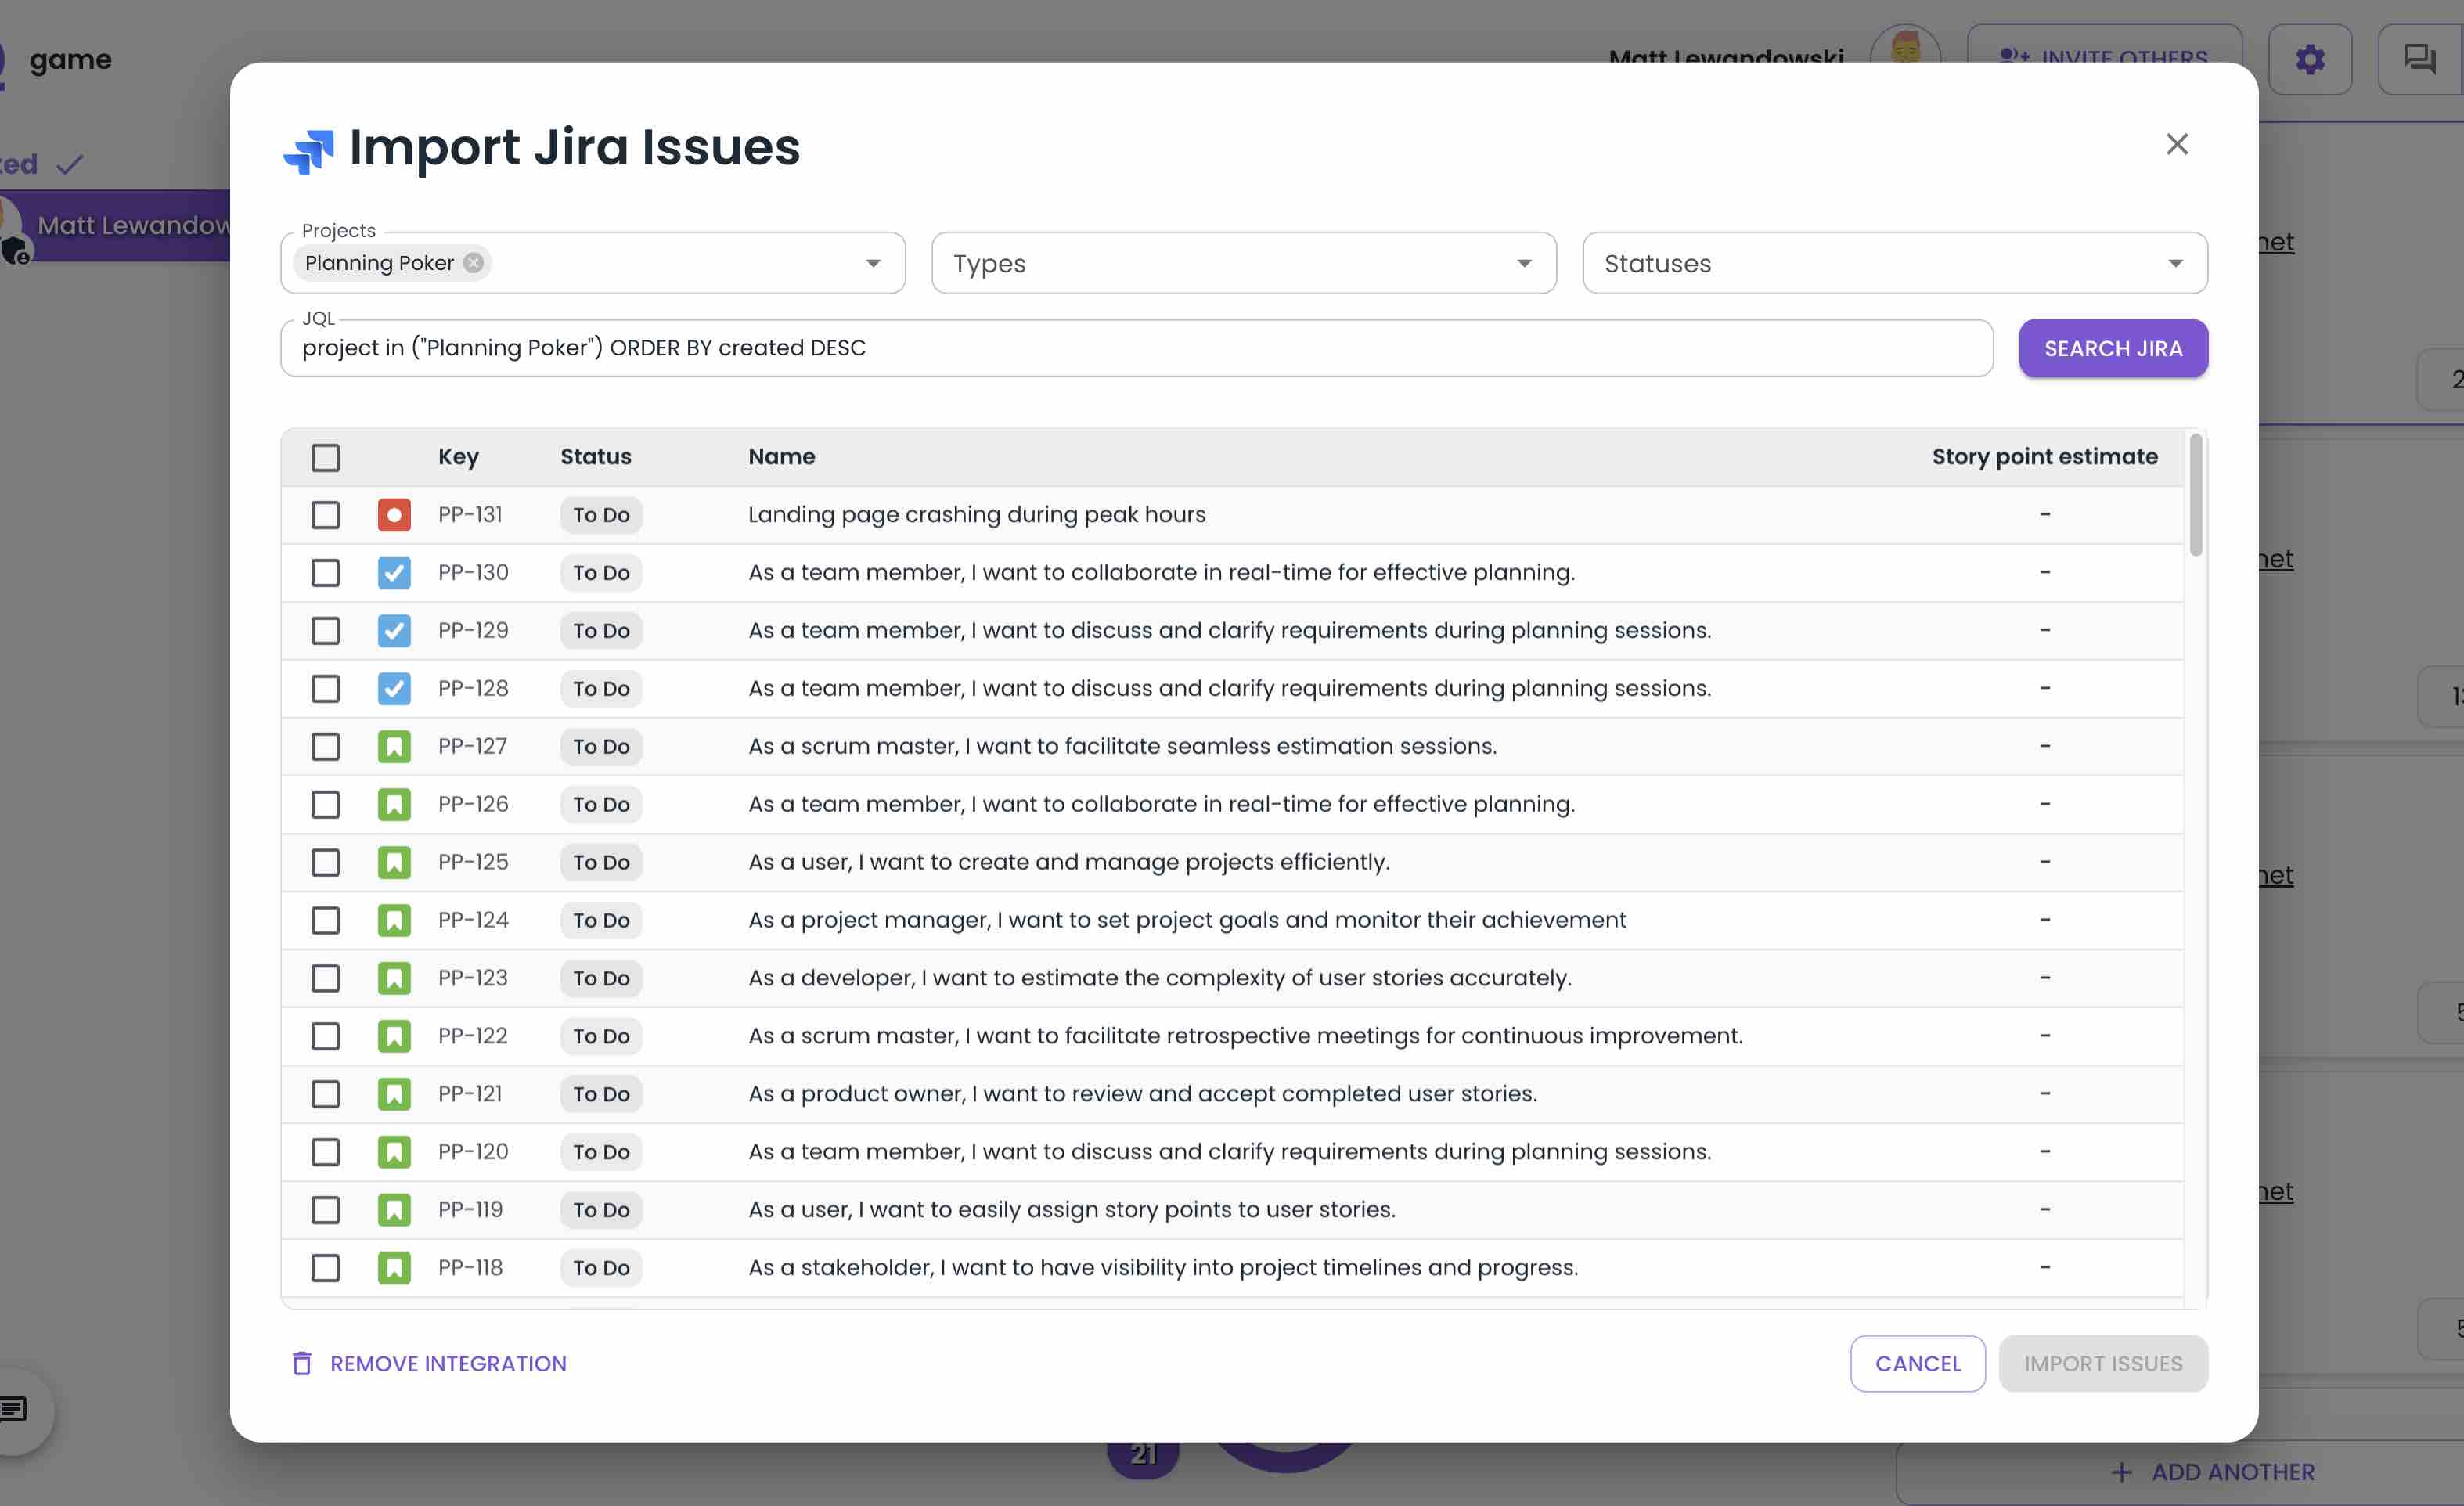 Importing tickets from Jira